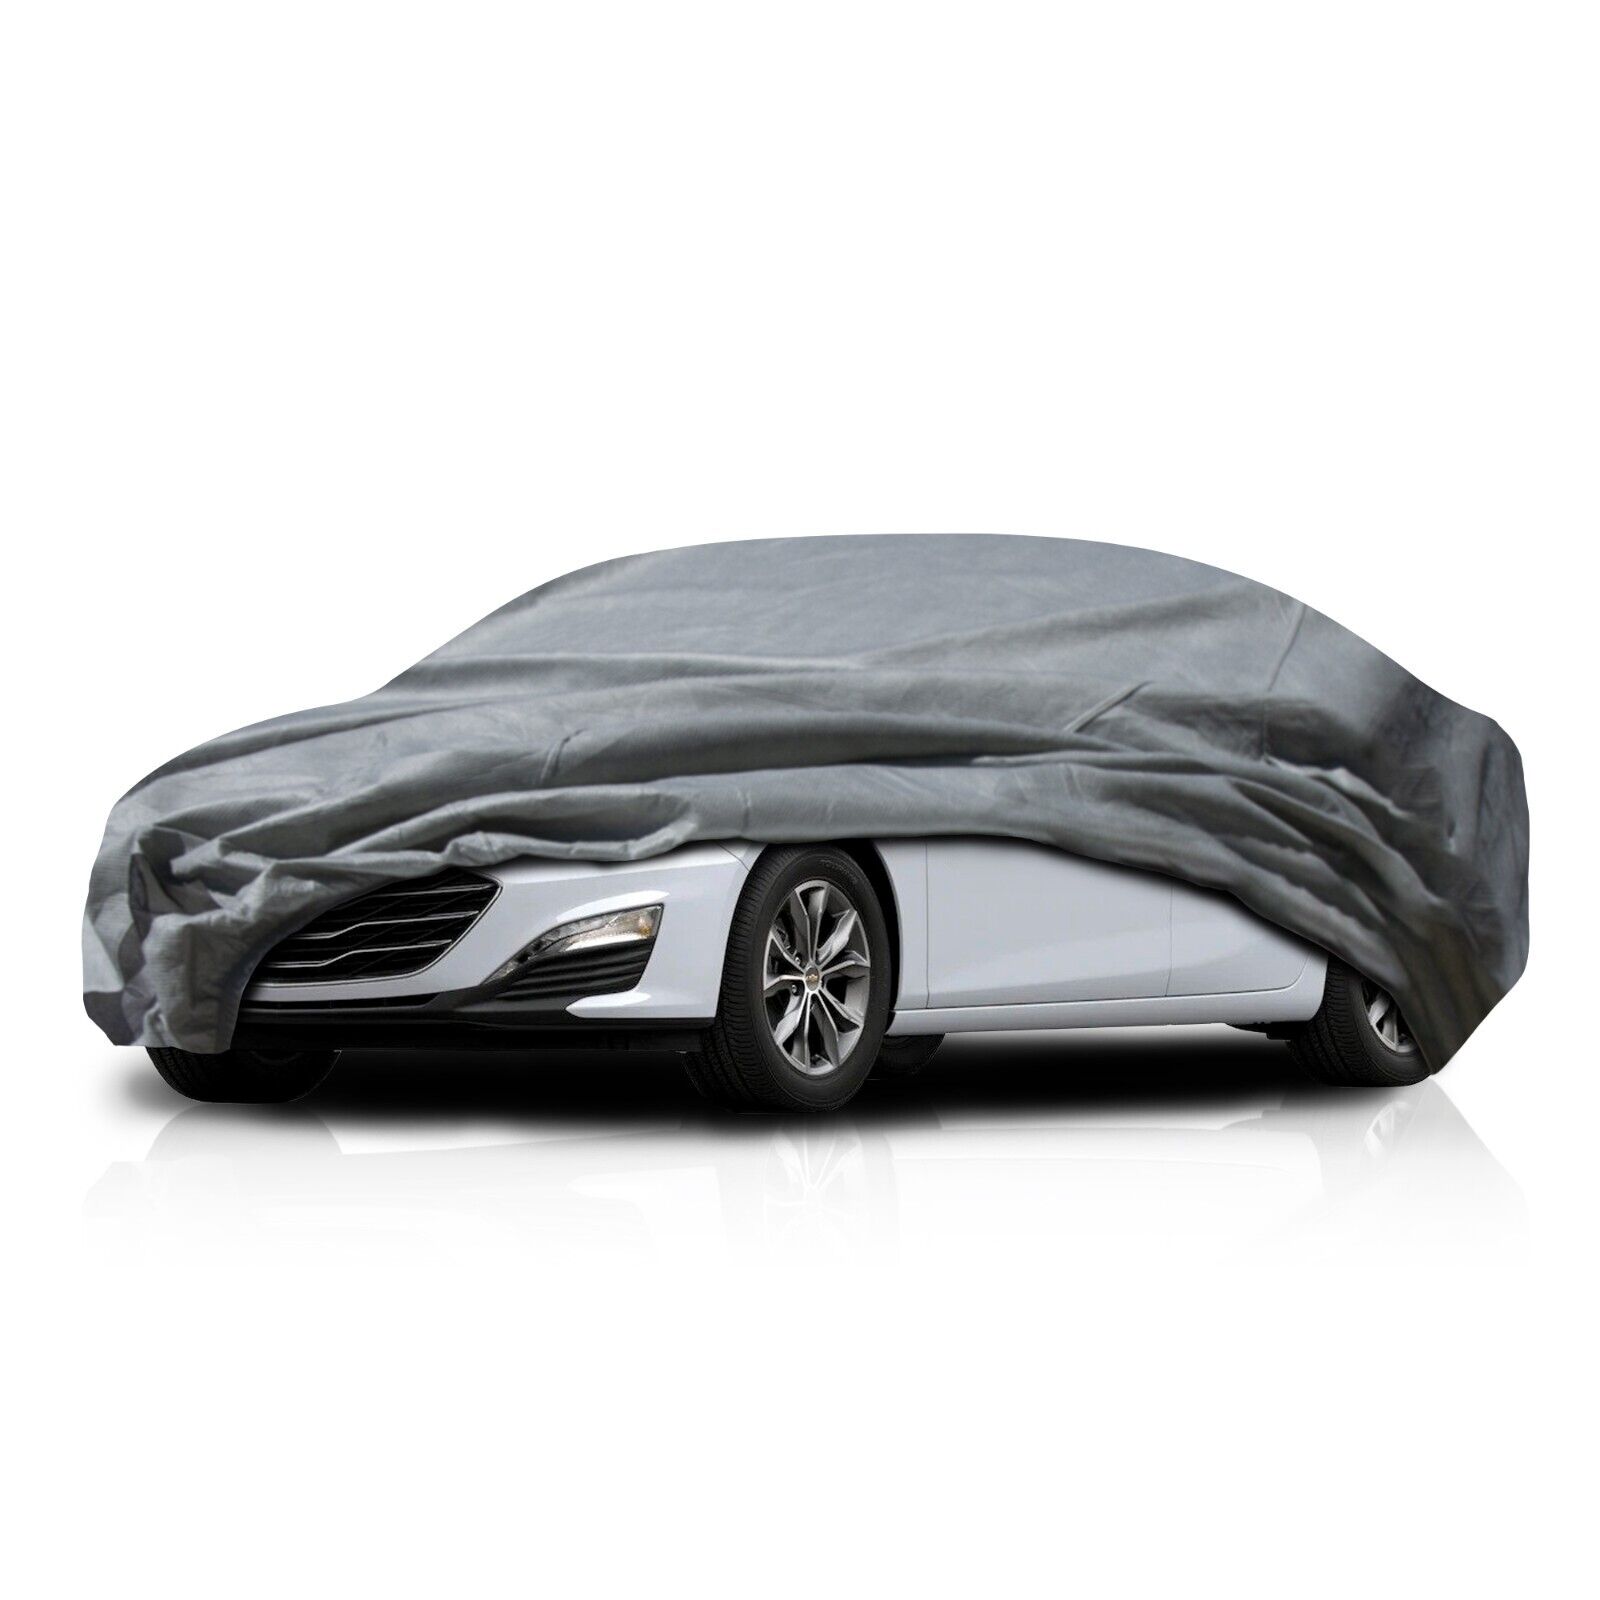 WeatherTec UHD 5 Layer Car Cover for Toyota Paseo Cynos 1991-1999